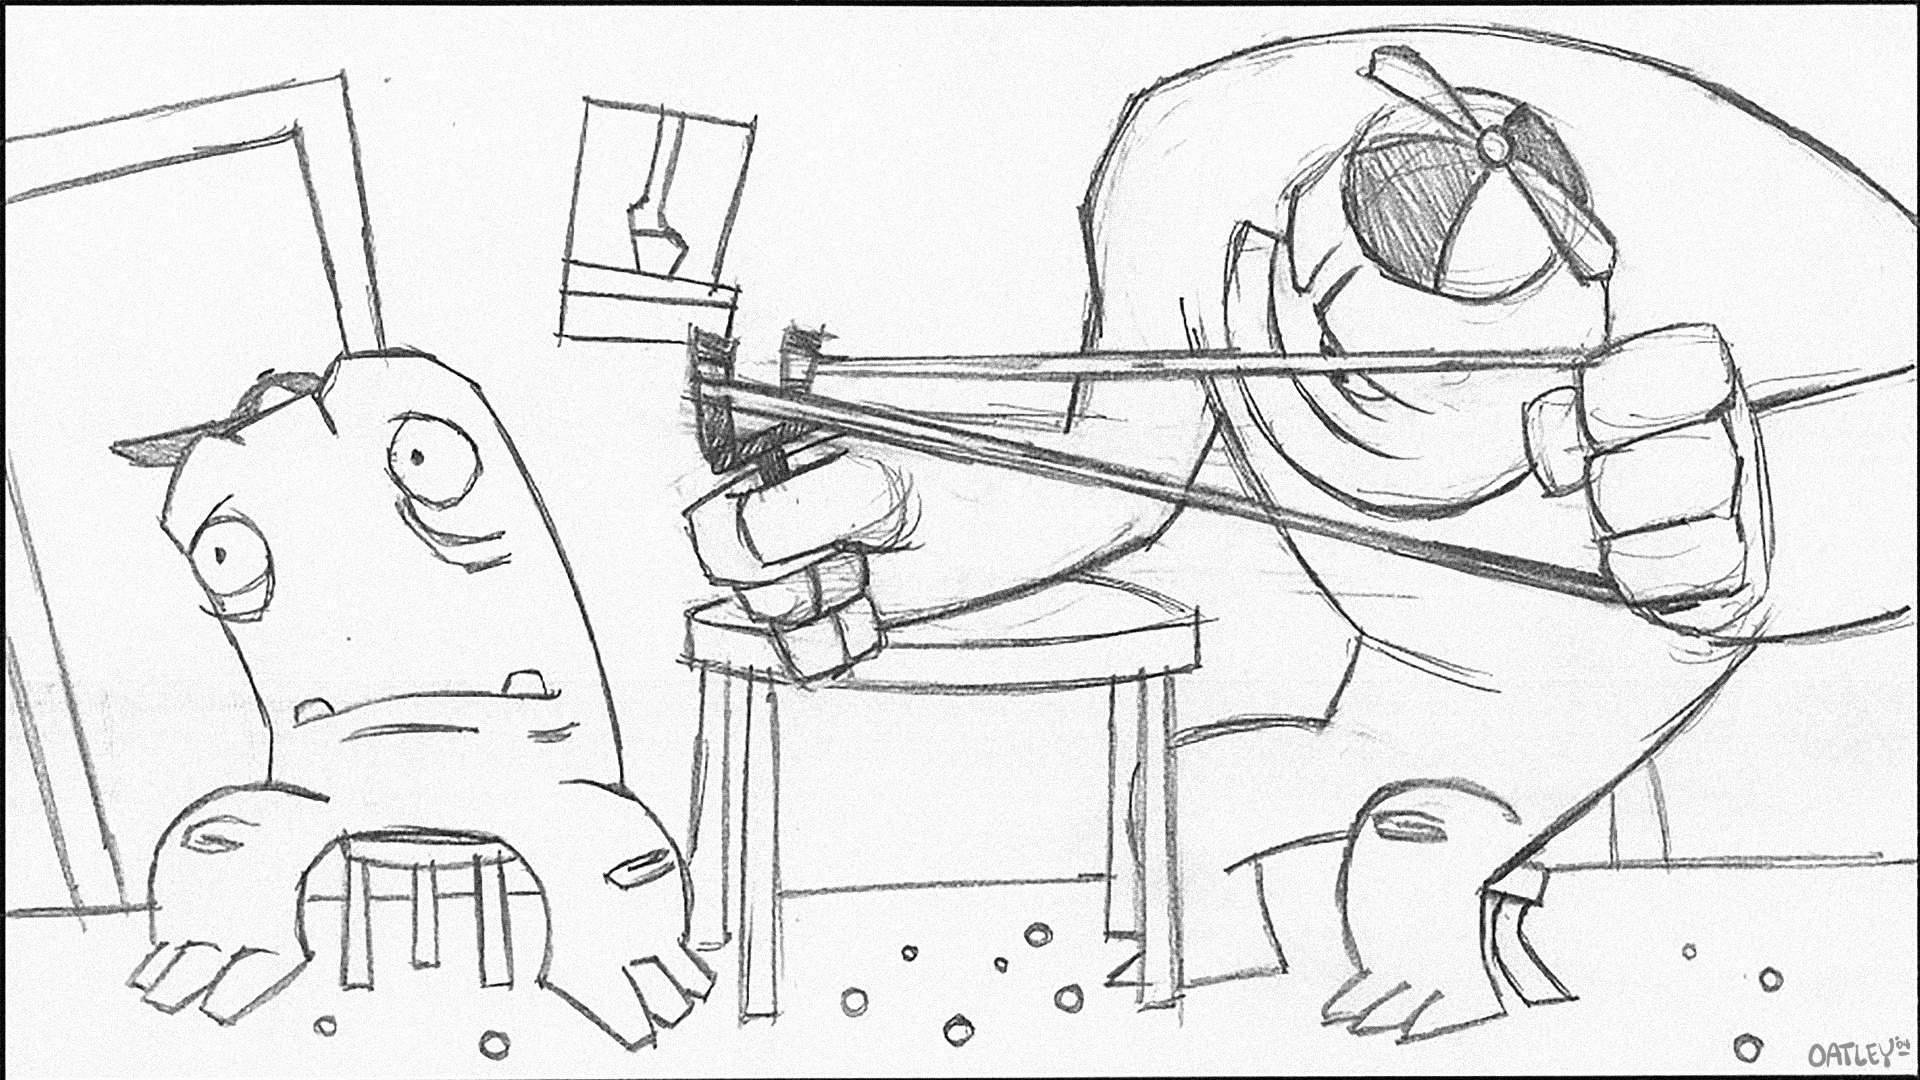 A storyboard panel done in pencil for Chris Oatley’s MFA project, showing two young monster characters sitting inside the house, one of which is aiming a slingshot at the other across the table. The floor is littered with marbles, implying numerous previous attempts.